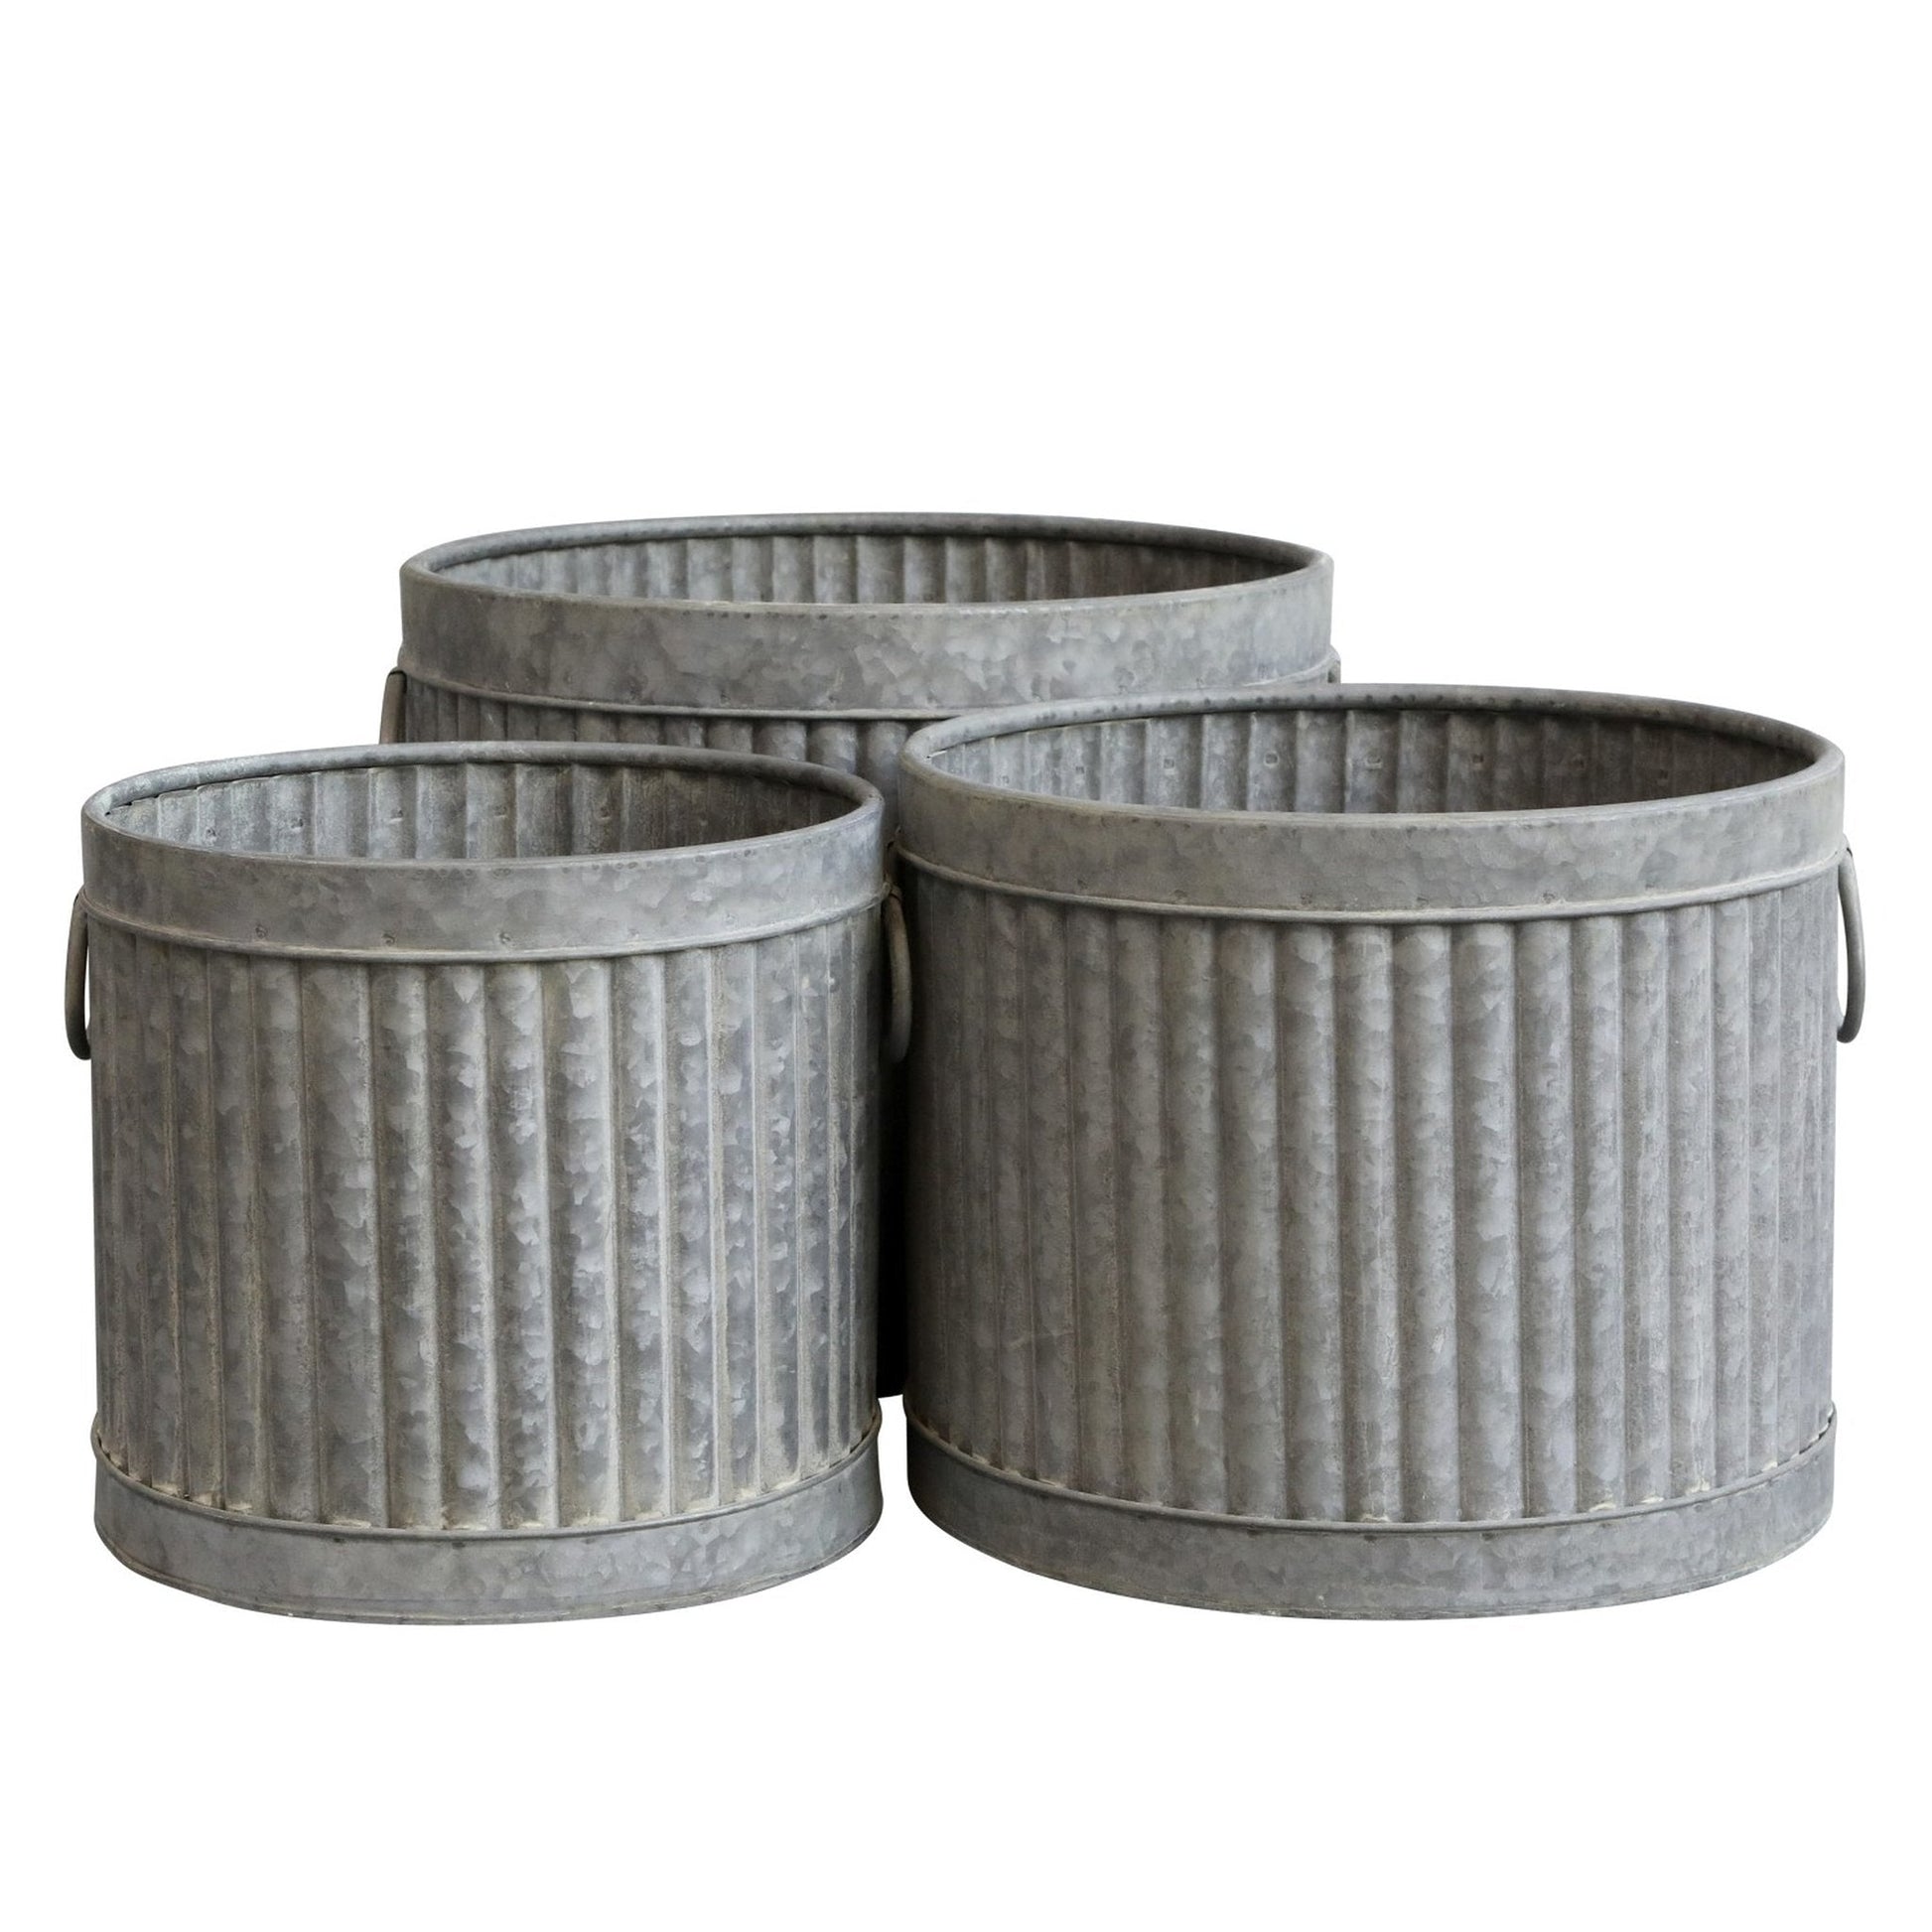 Large Round Grooved Metal Planter - Bumble Living